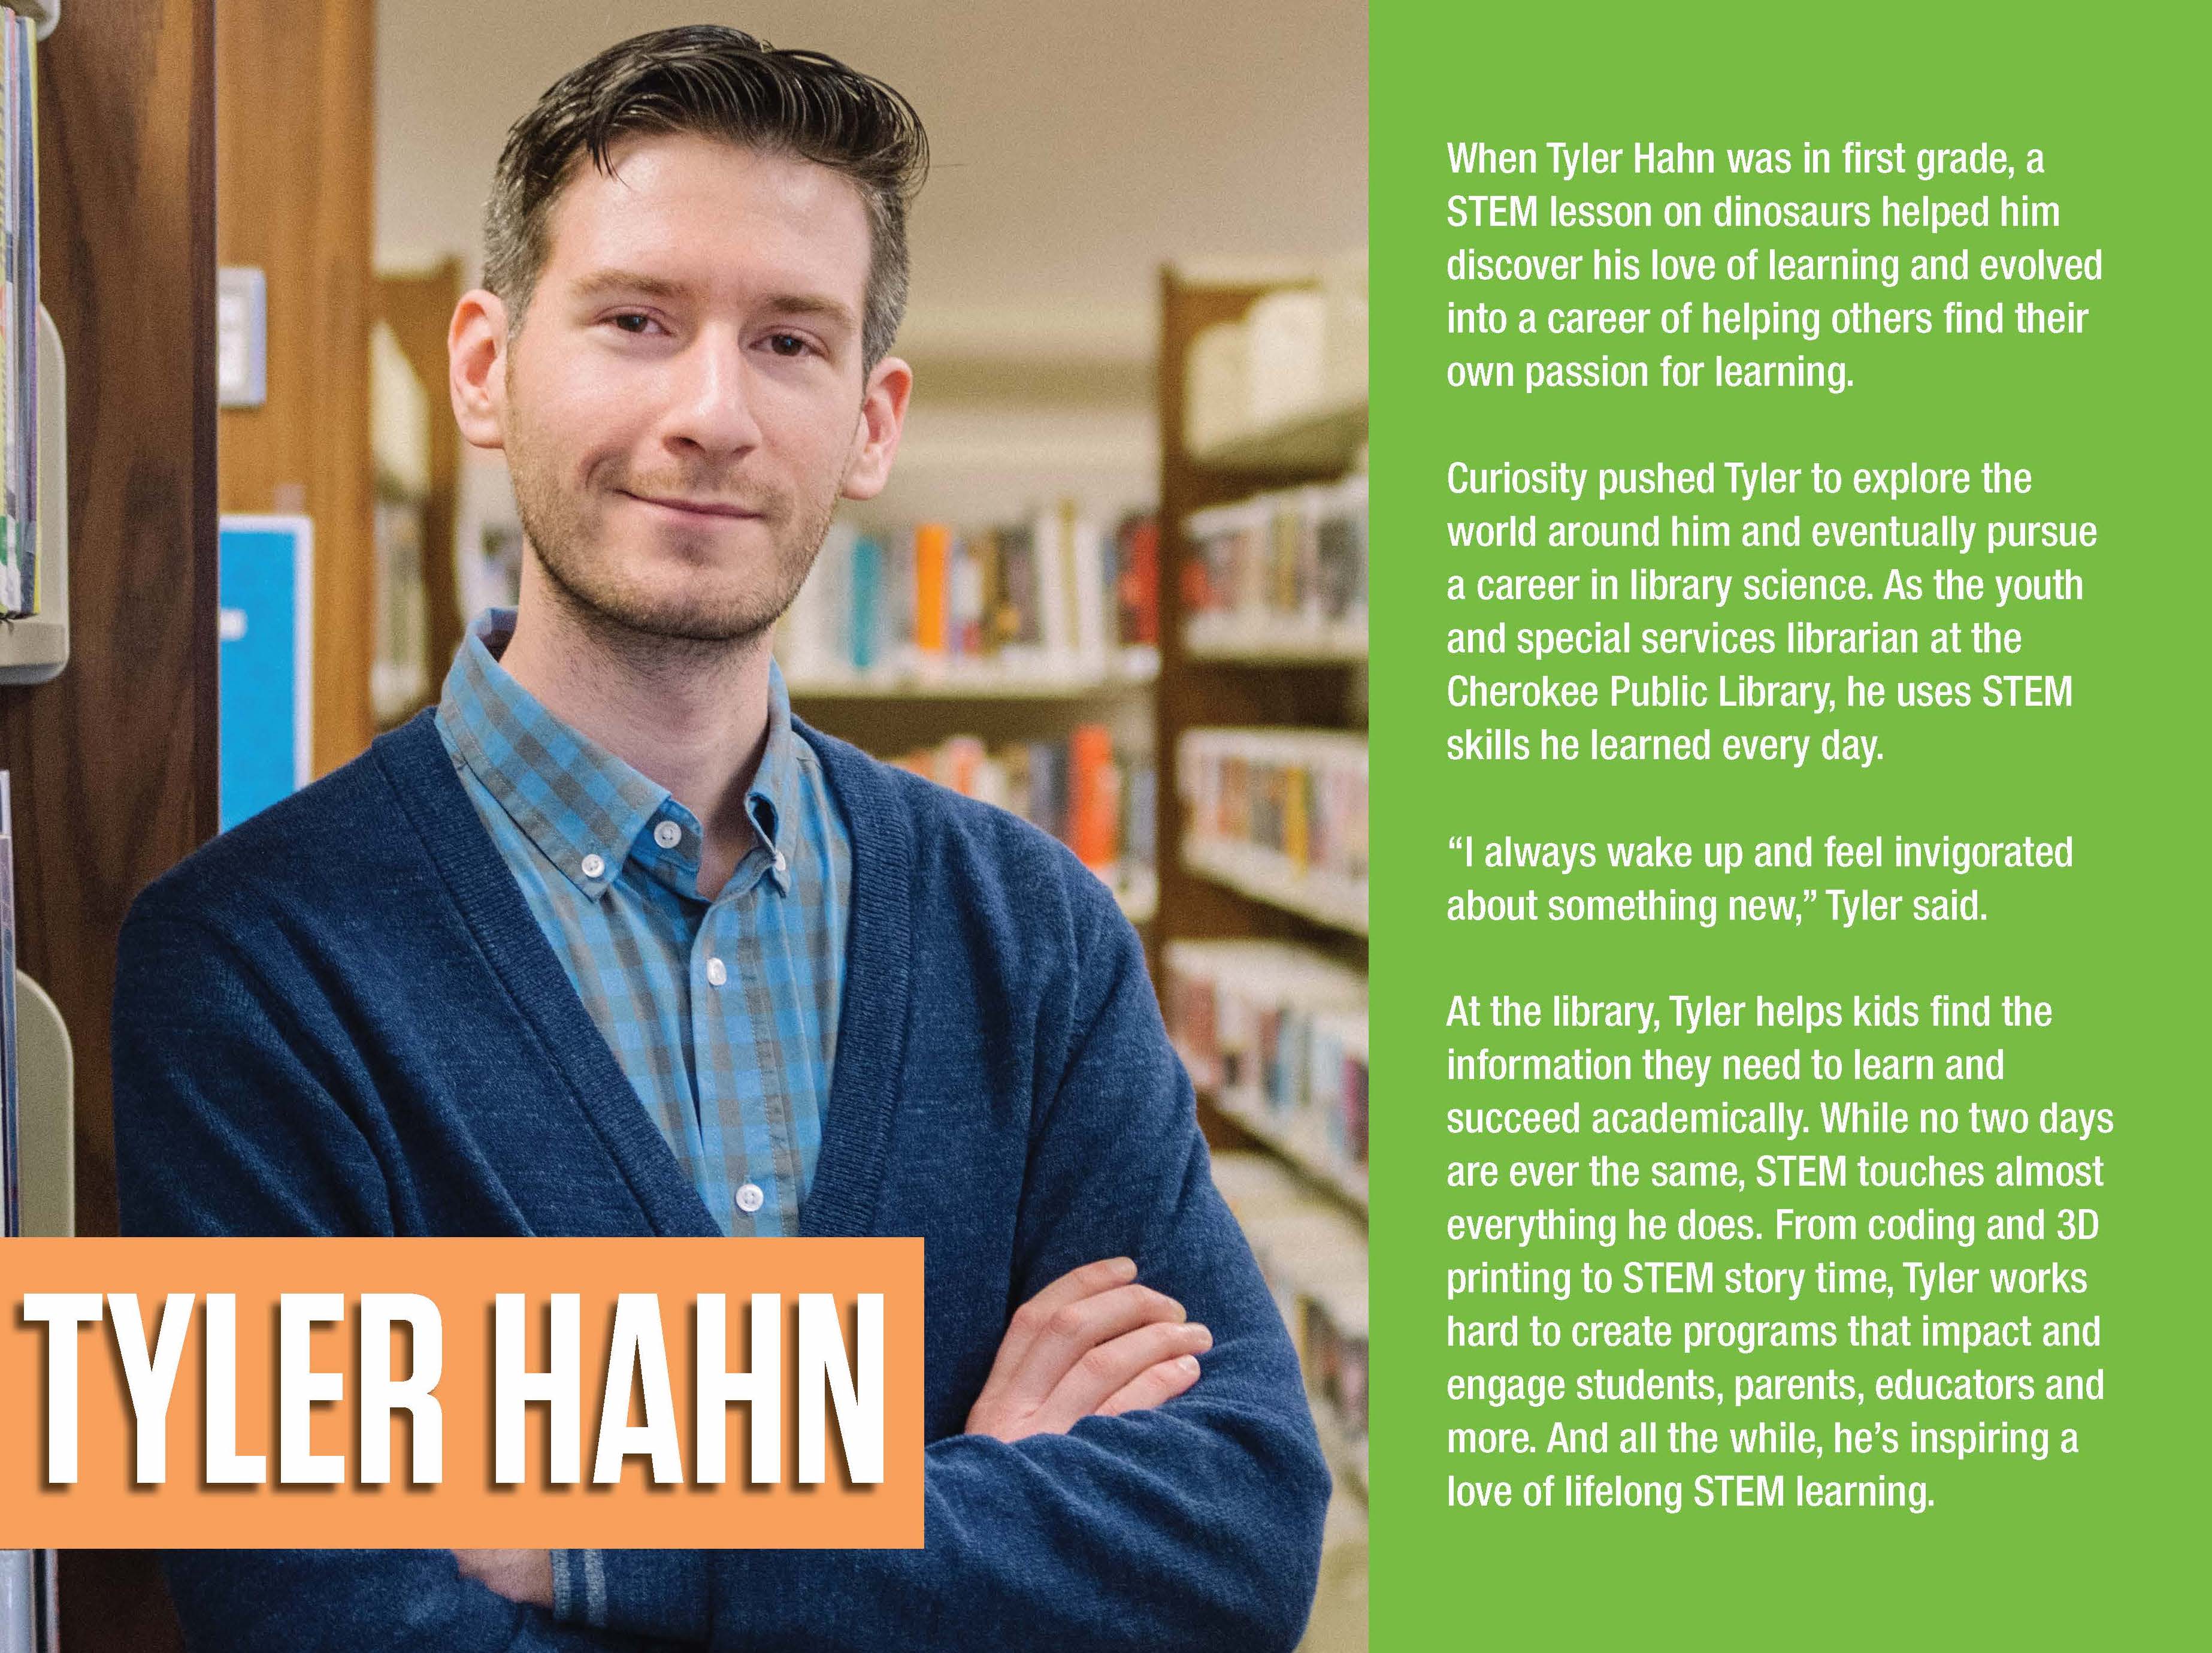 The latest STEM Gem poster features Youth and Special Services Librarian Tyler Hahn.